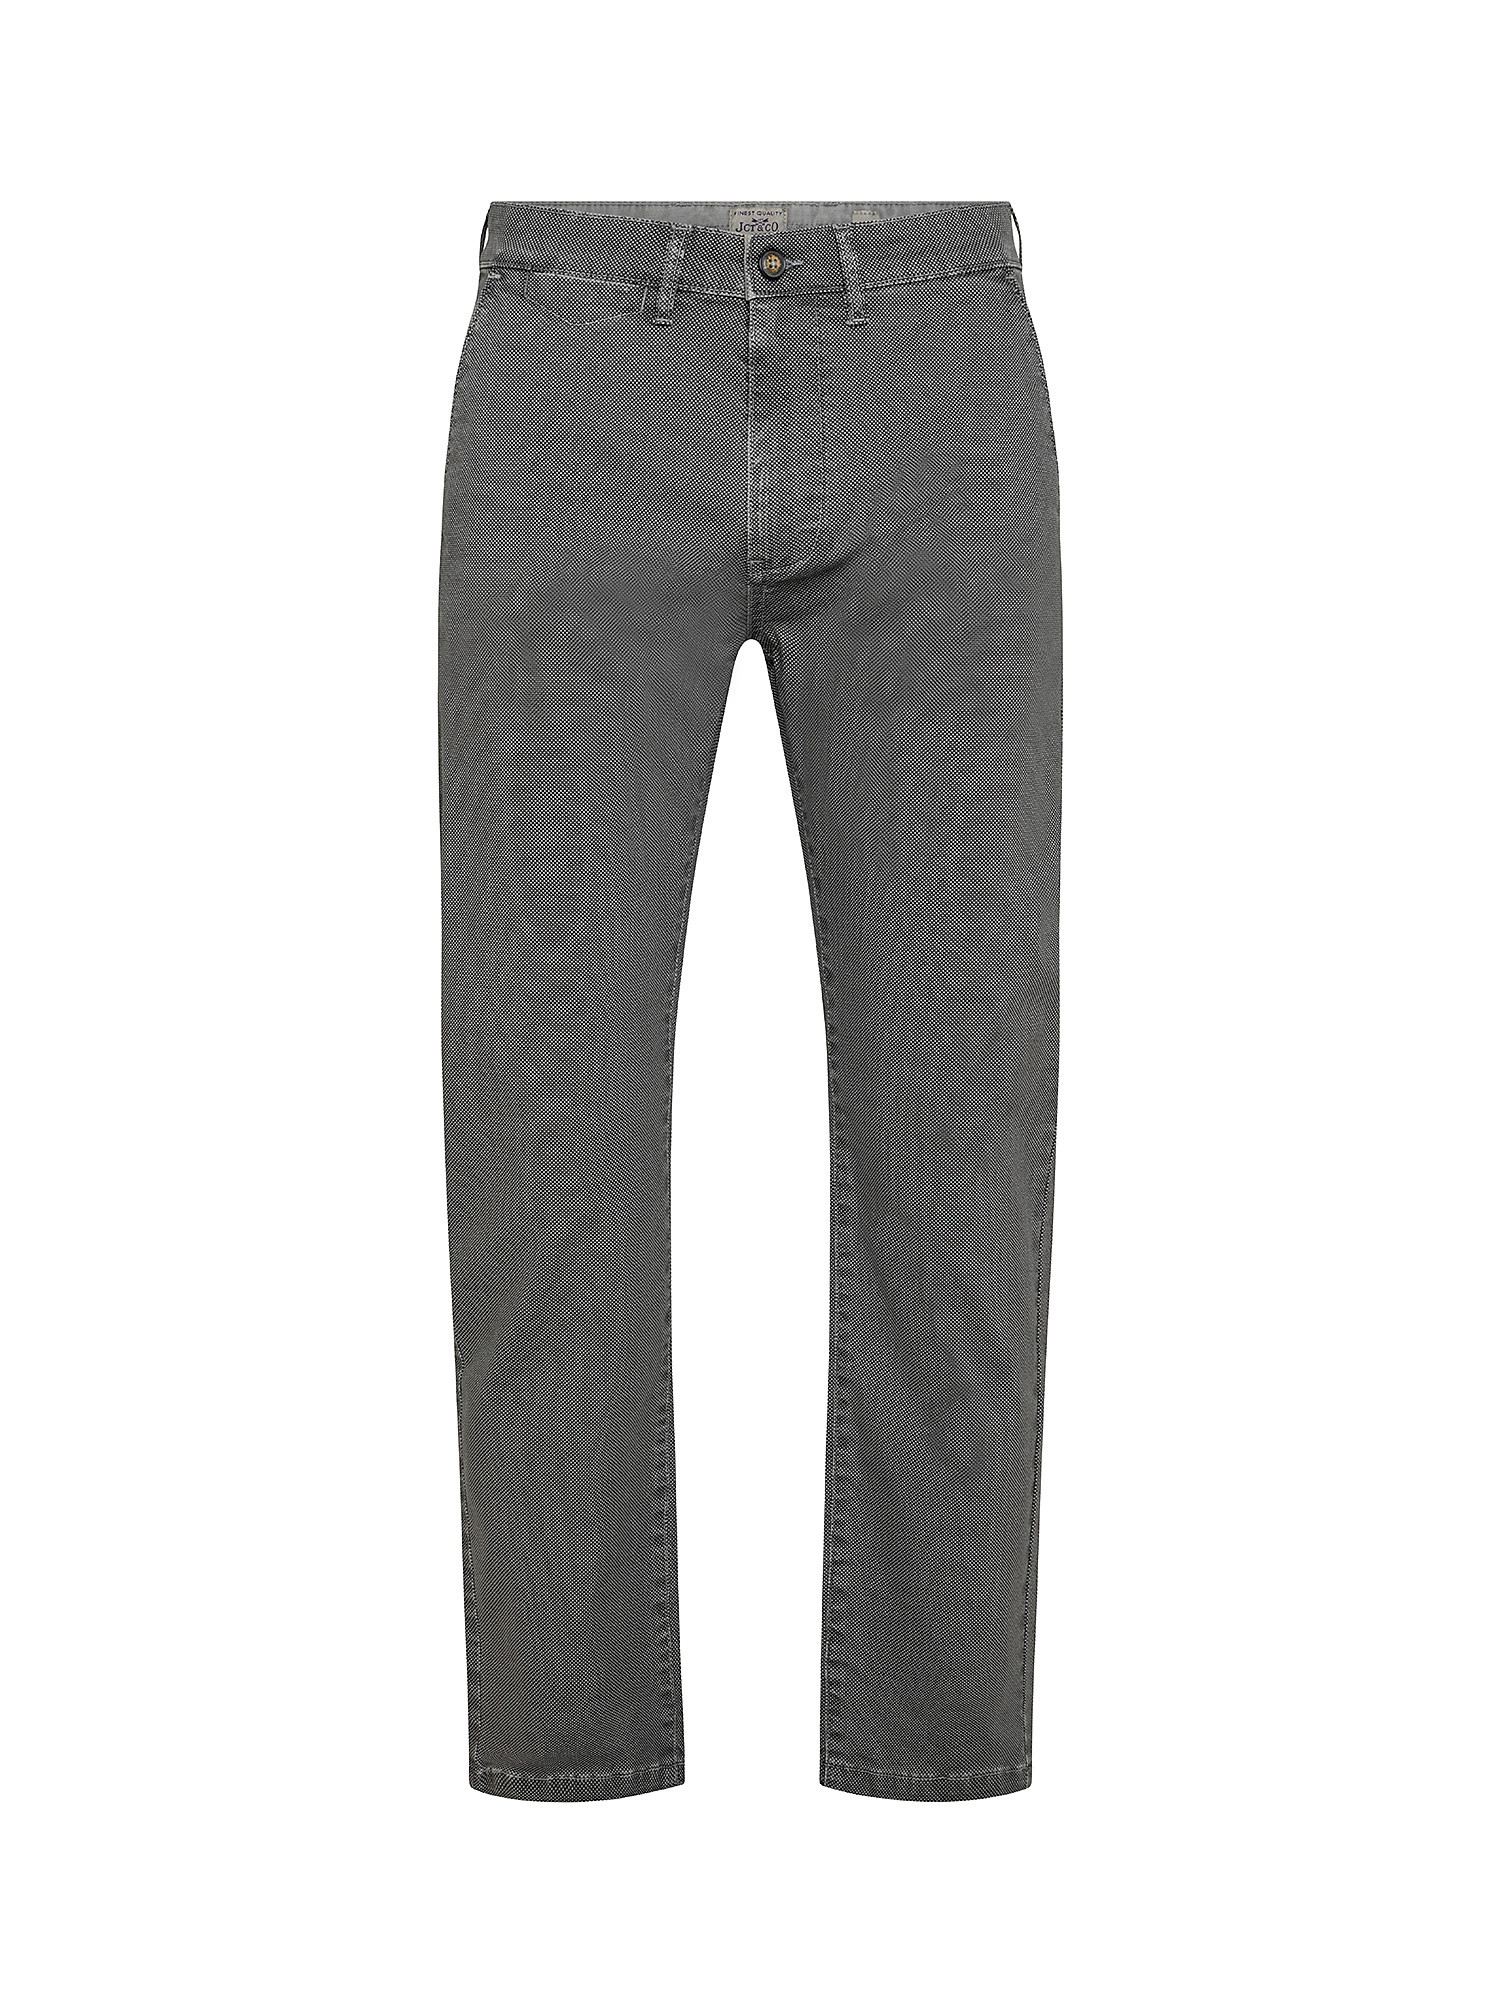 Stretch cotton chinos trousers, Grey, large image number 0